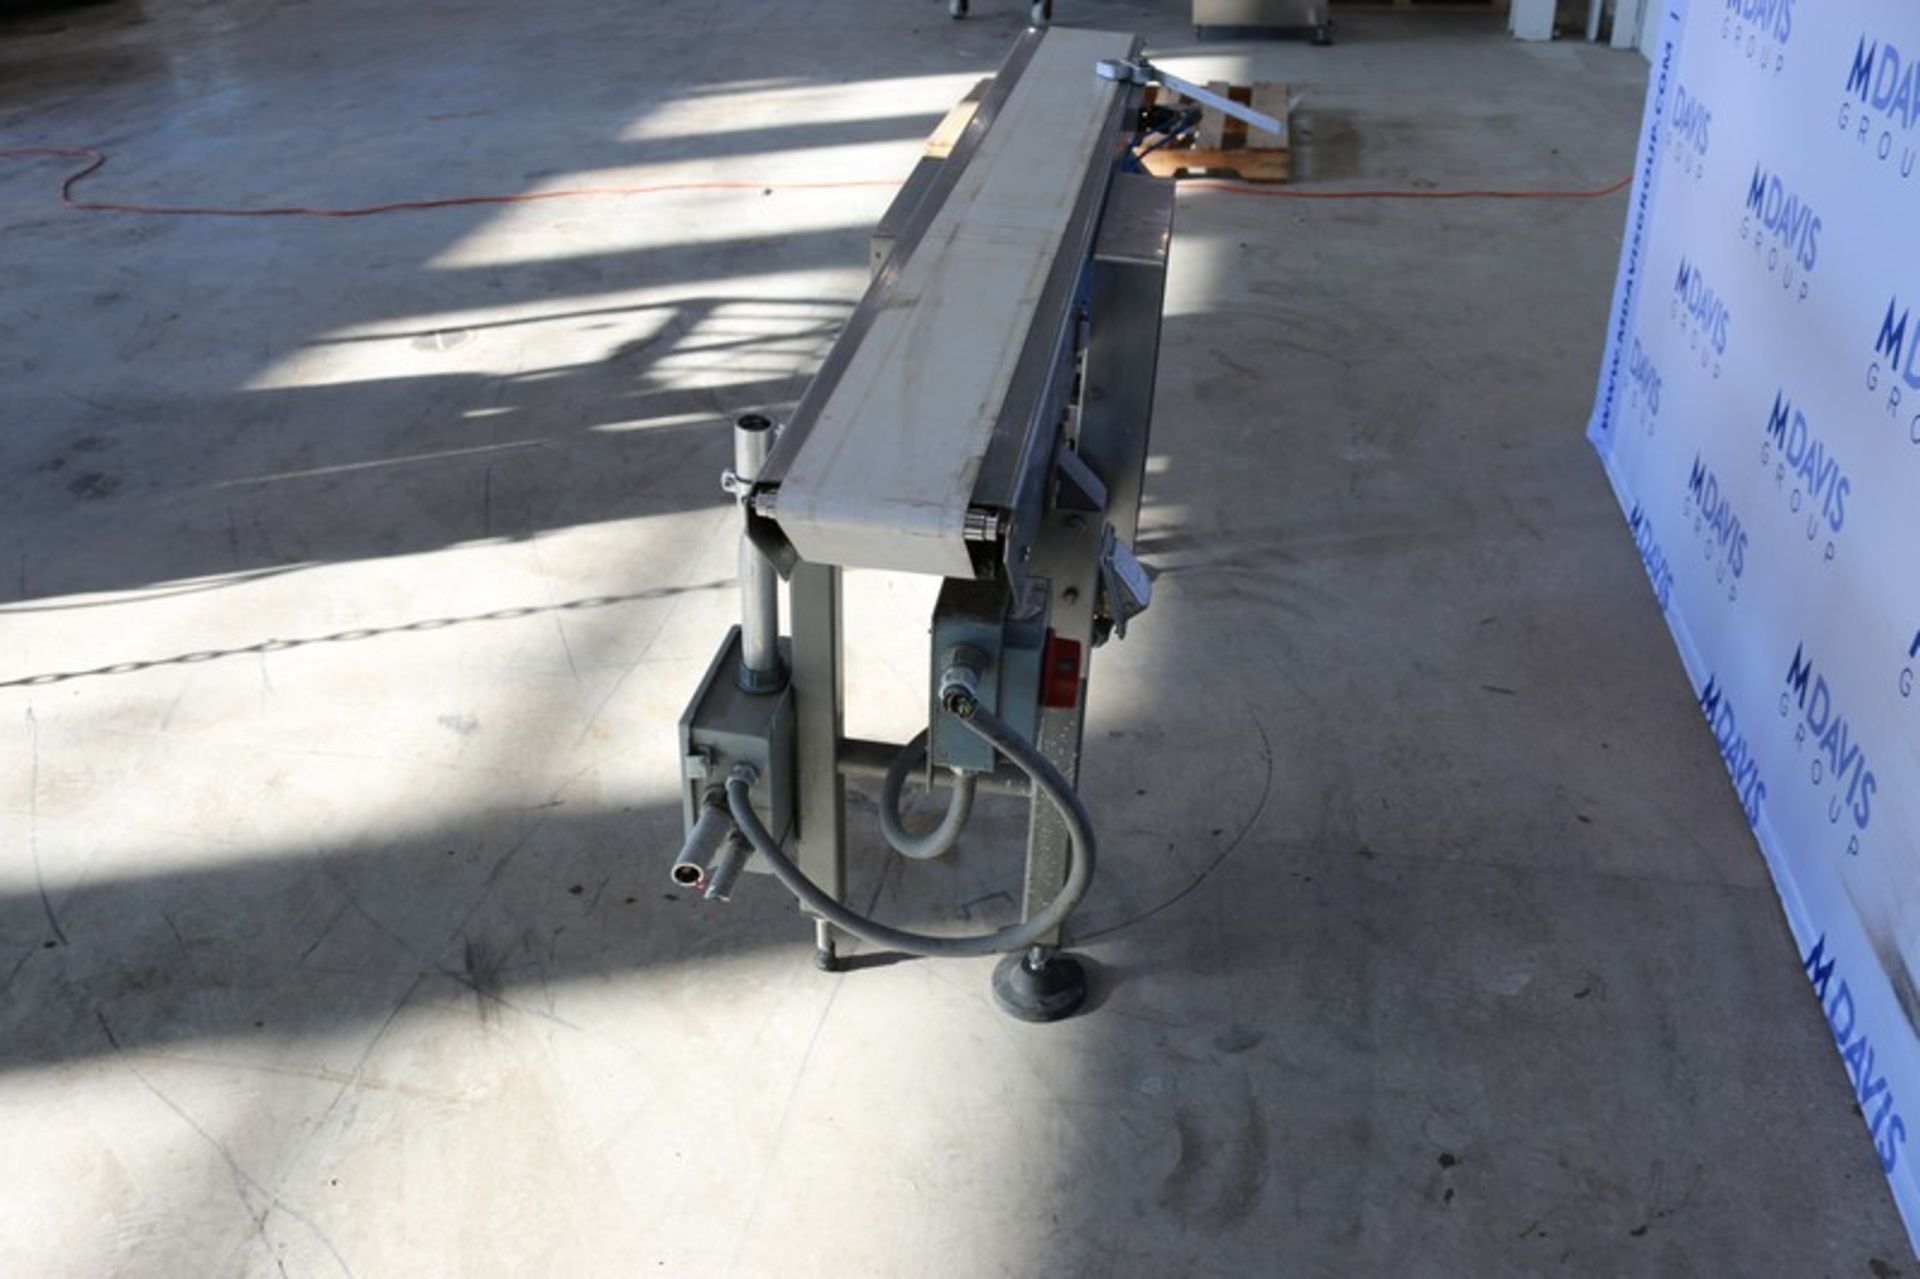 Benchmark Automation S/S Conveyor, M/N RH BC, Job #: 2006 11-C, 480 Volts, 3 Phase, Aprox. 72" L - Image 7 of 10